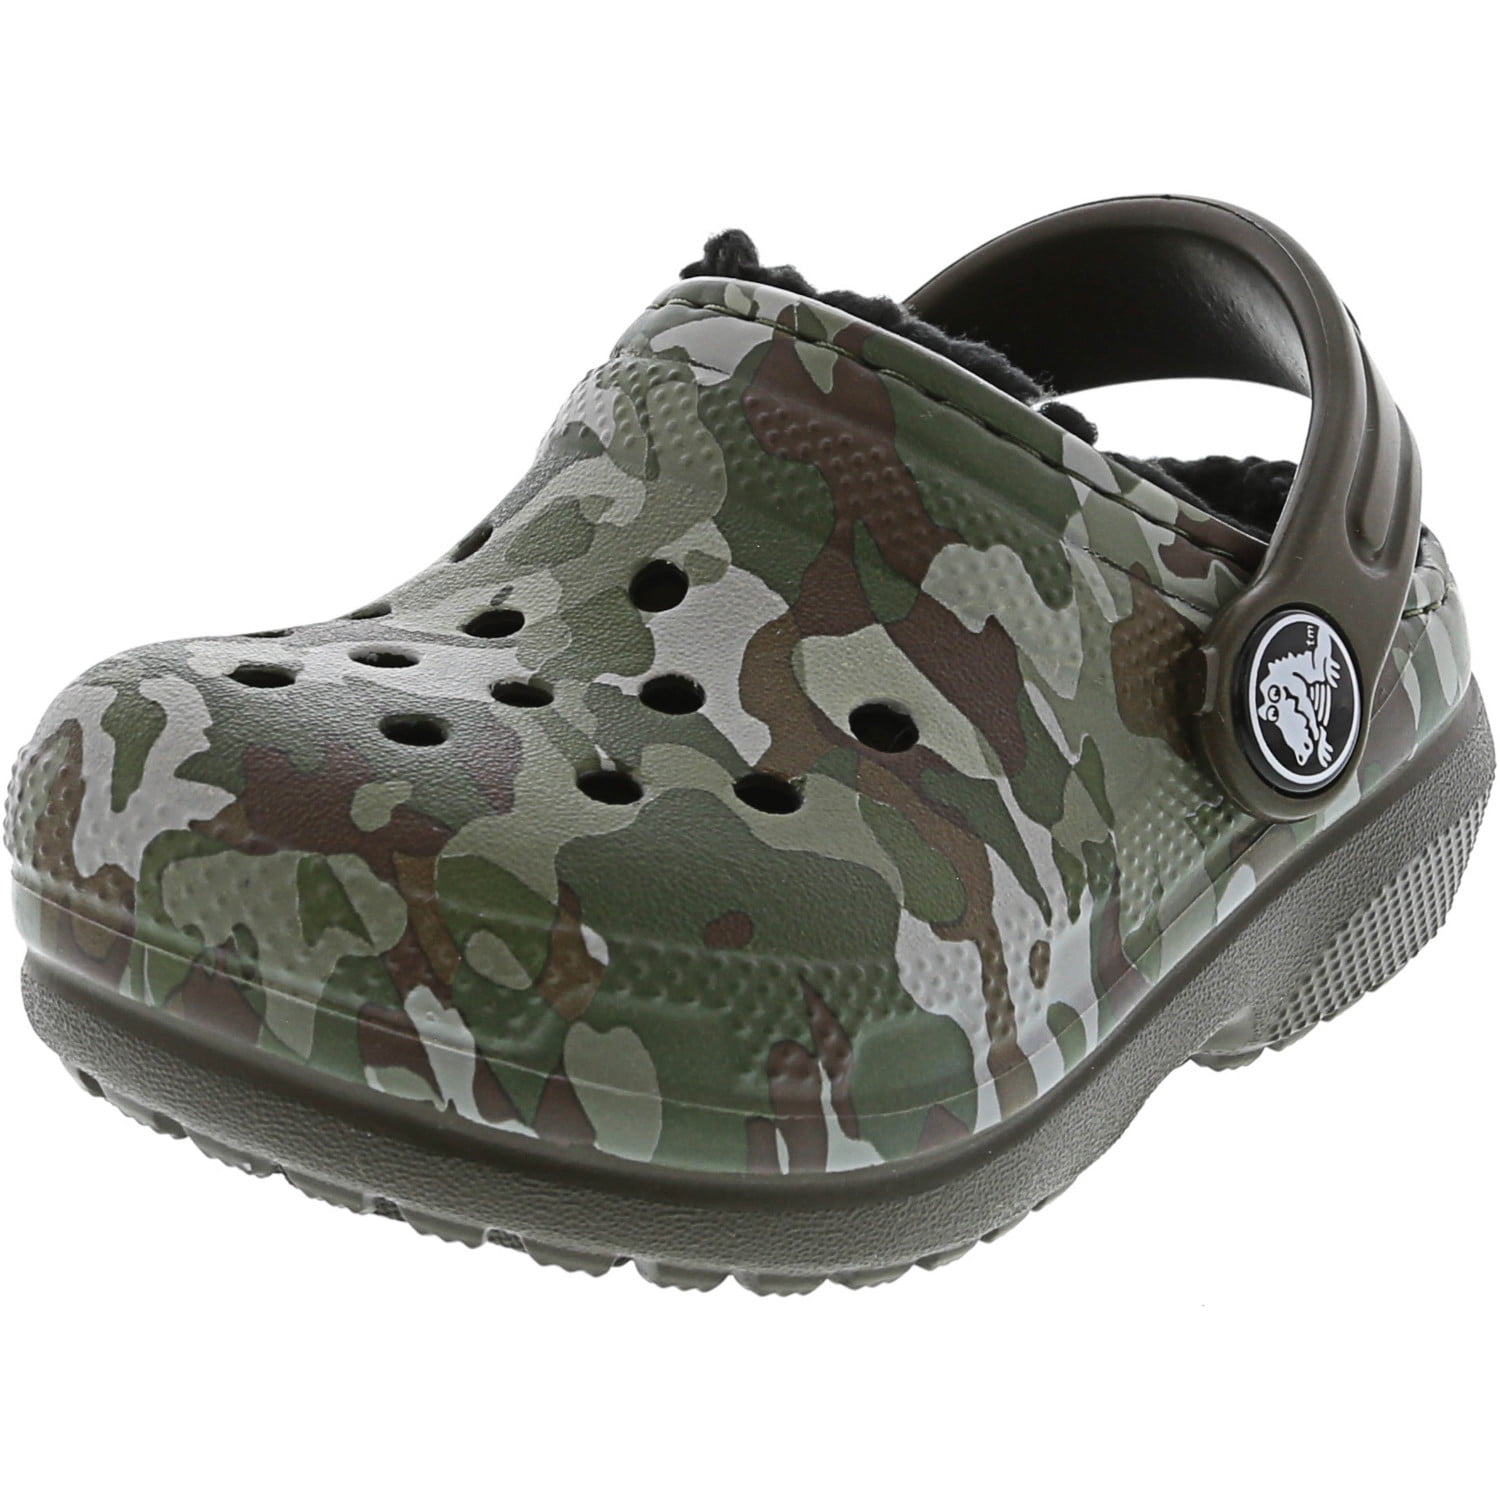 Crocs Classic Lined Graphic Clog Dark Camo Green / Black Ankle-High ...